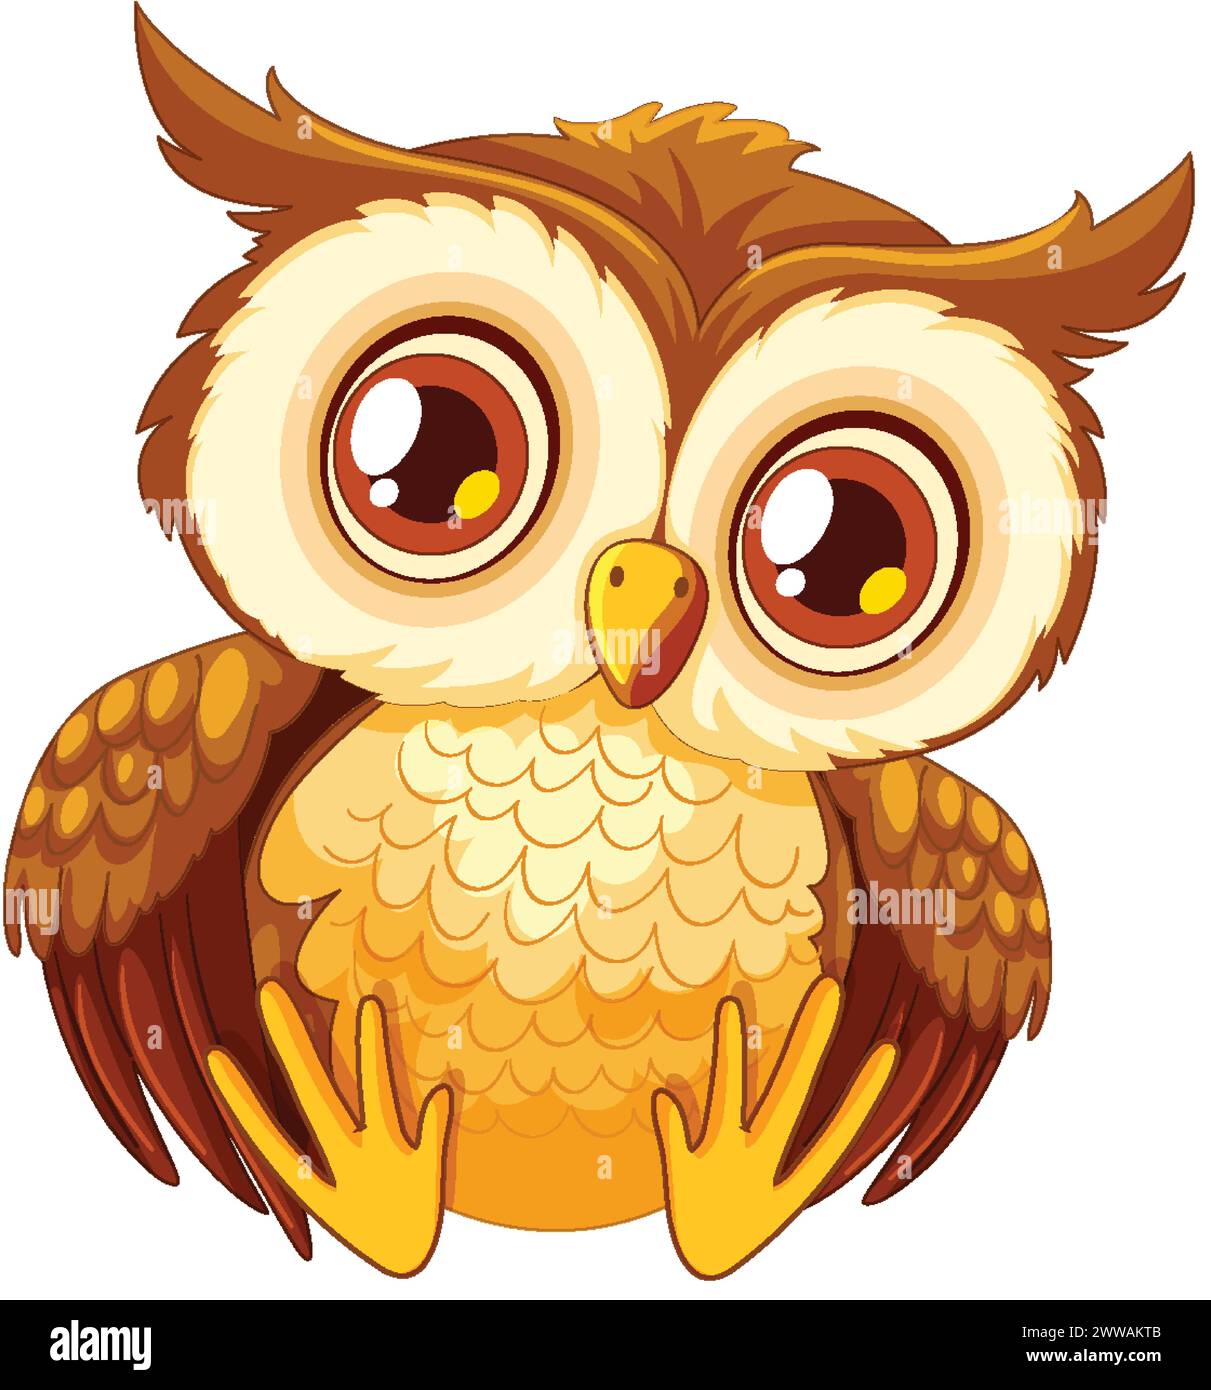 Cute, wide-eyed owl with a whimsical charm Stock Vector